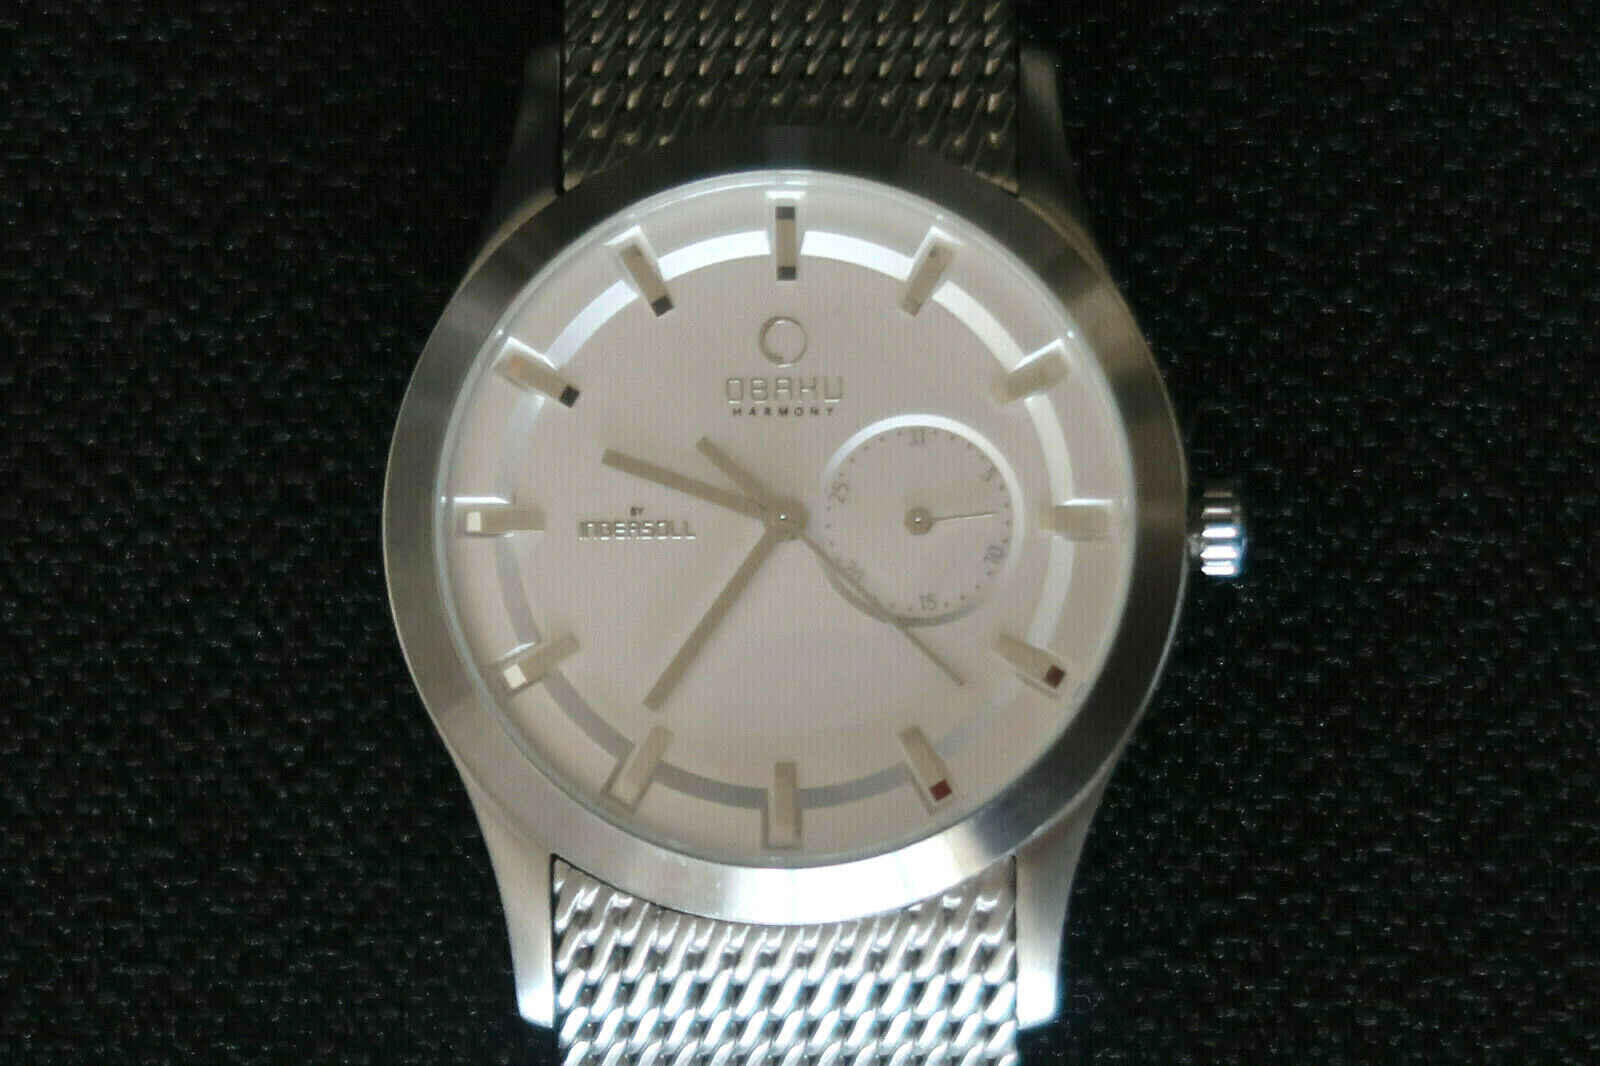 OBAKU HARMONY MENS WATCH QUARTZ SILVER BRUSHED CHROME AND STAINLESS STEEL STRAP 